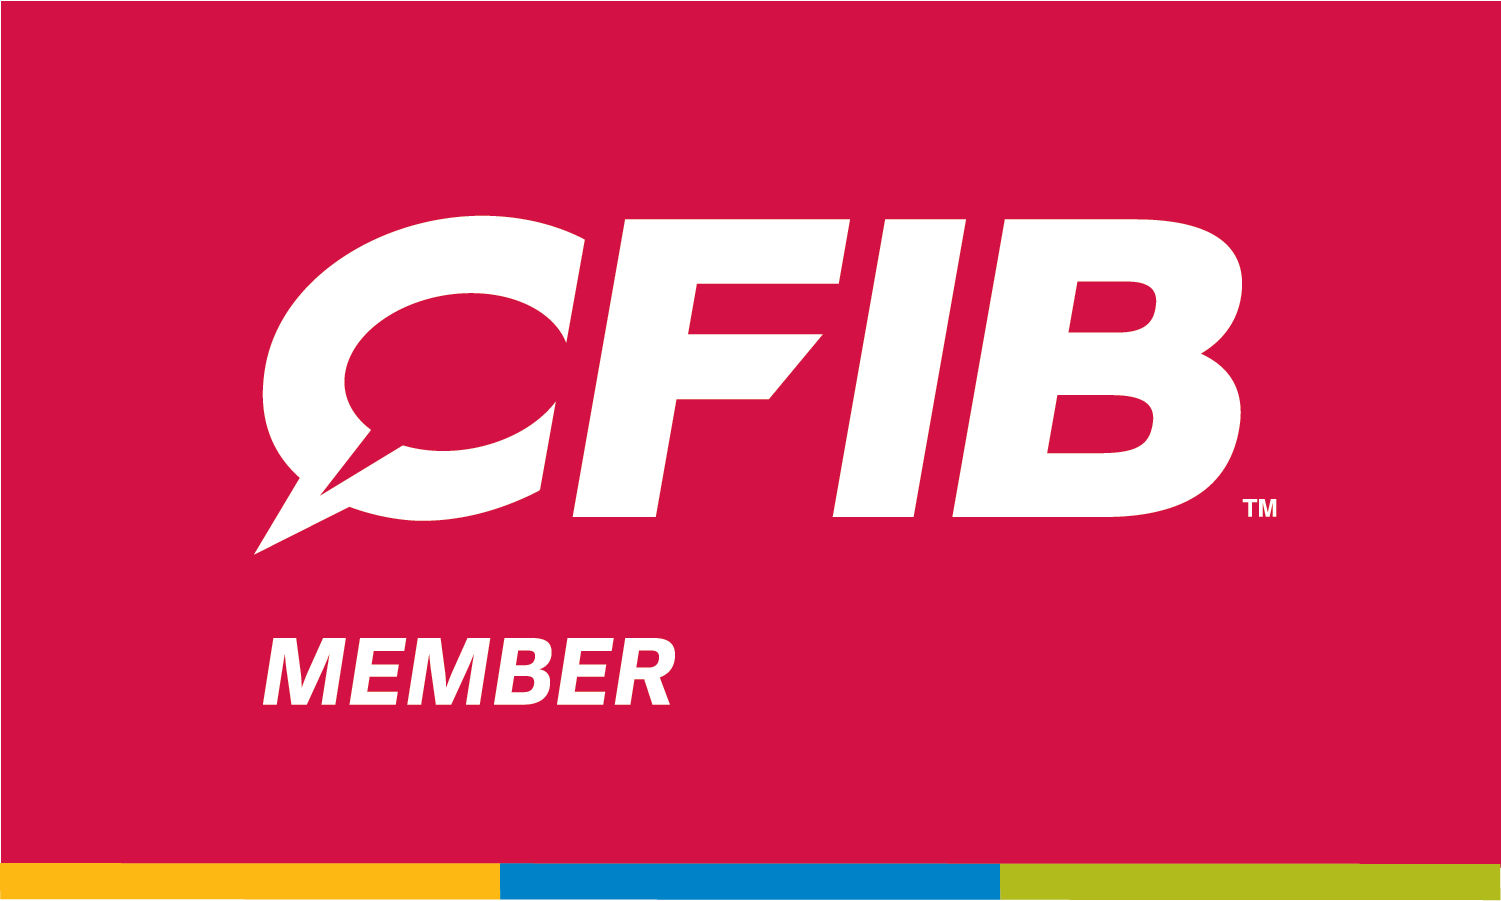 a cfib member logo on a pink background